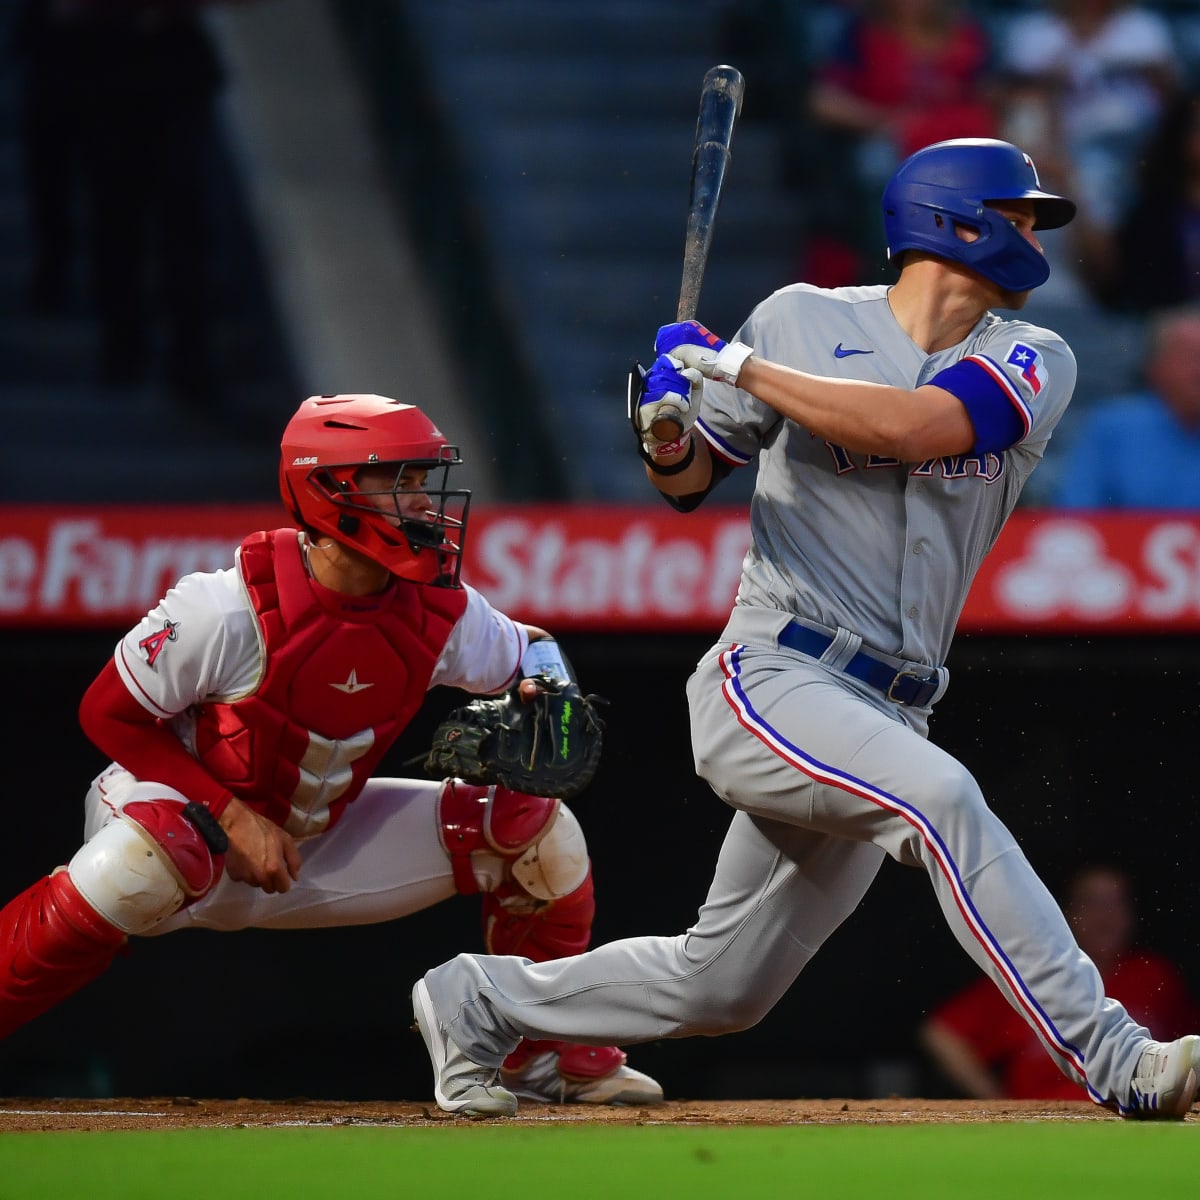 Seager's hitting and Gray's pitching lead Rangers to 11-5 win over Rockies  - The San Diego Union-Tribune